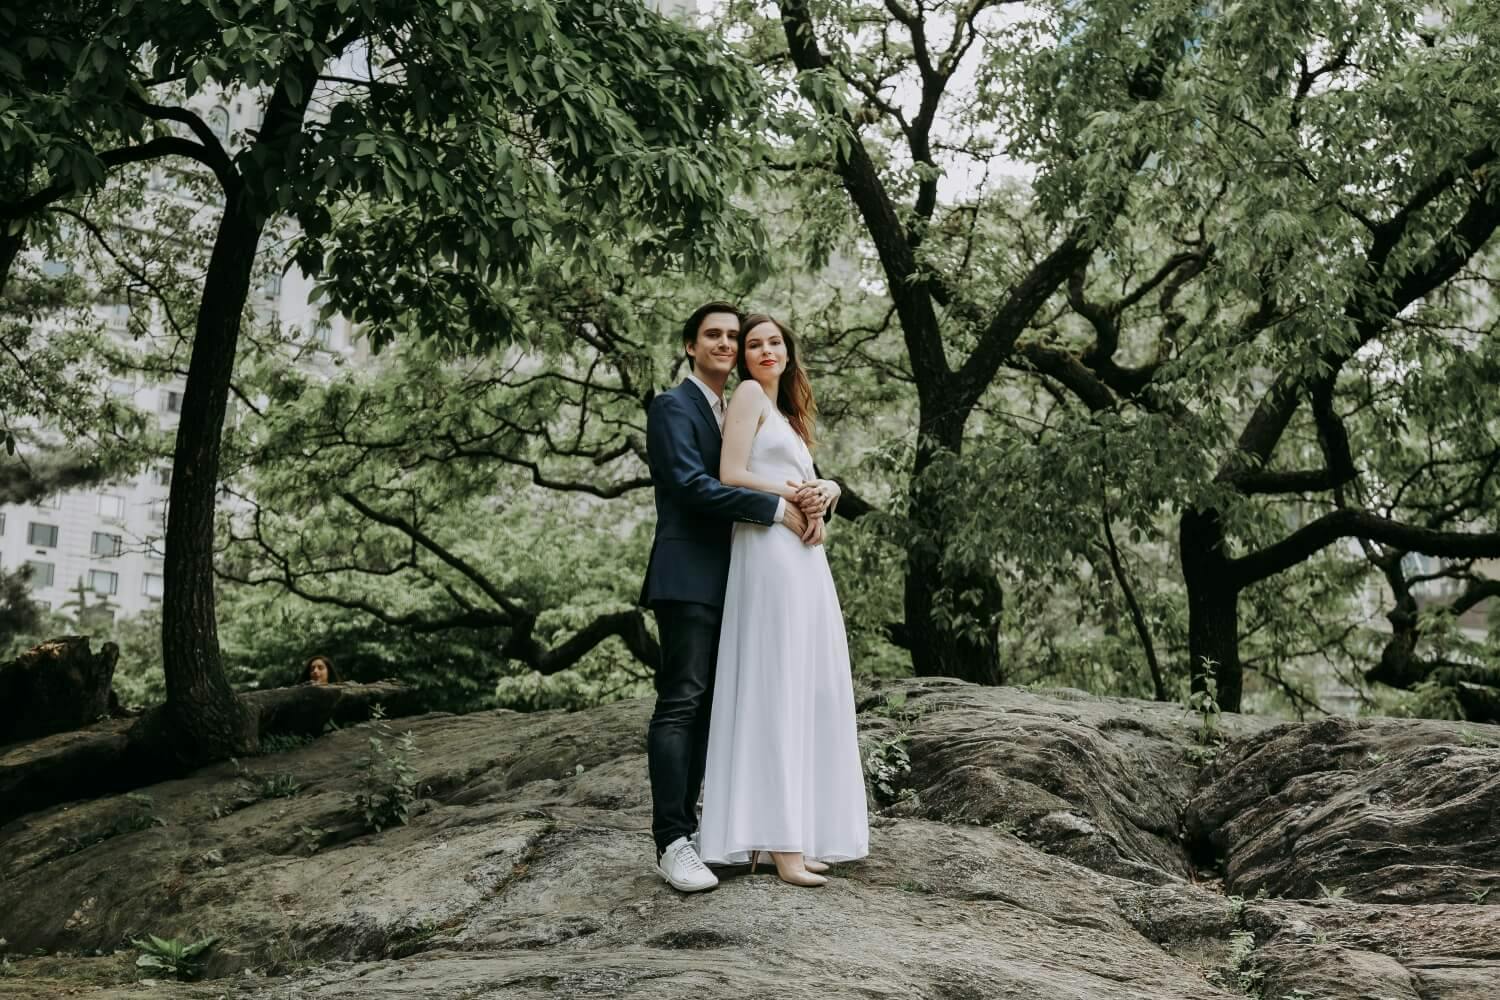 A couple standing together on a rocky outcrop in a park